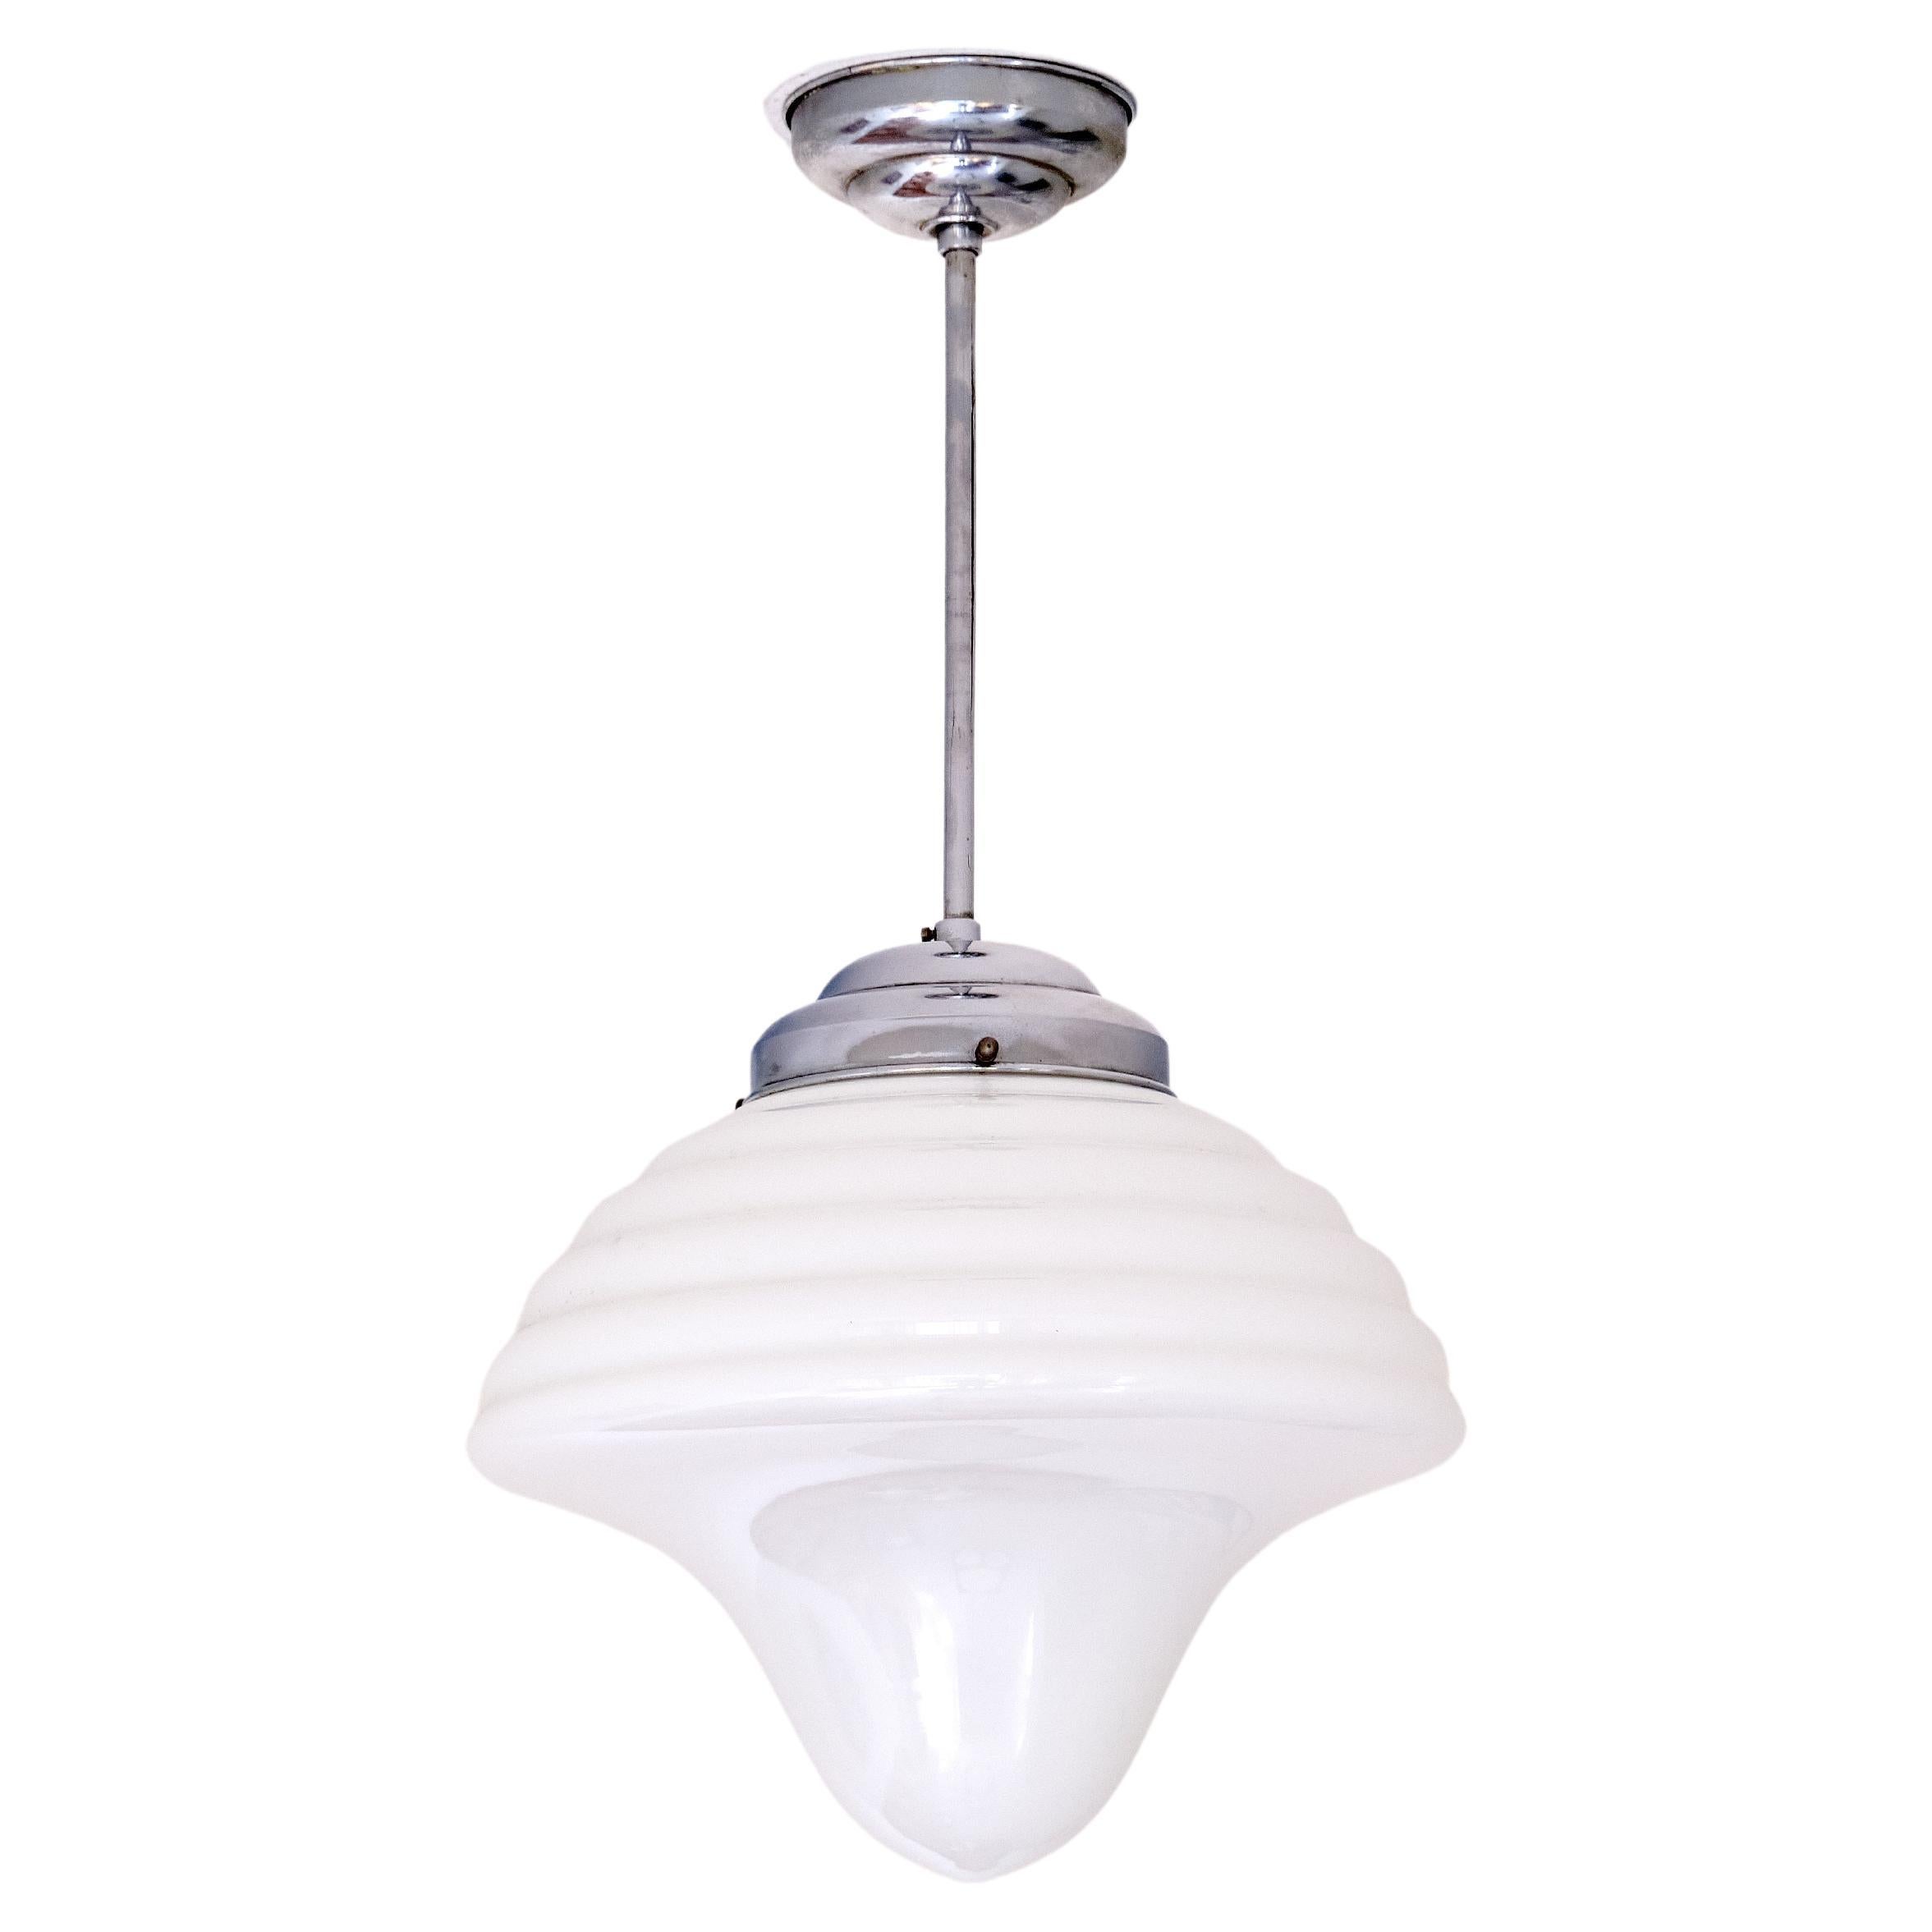 Art Deco Drop Shaped Pendant Light in Opal Glass and Nickel, Netherlands, 1930s For Sale